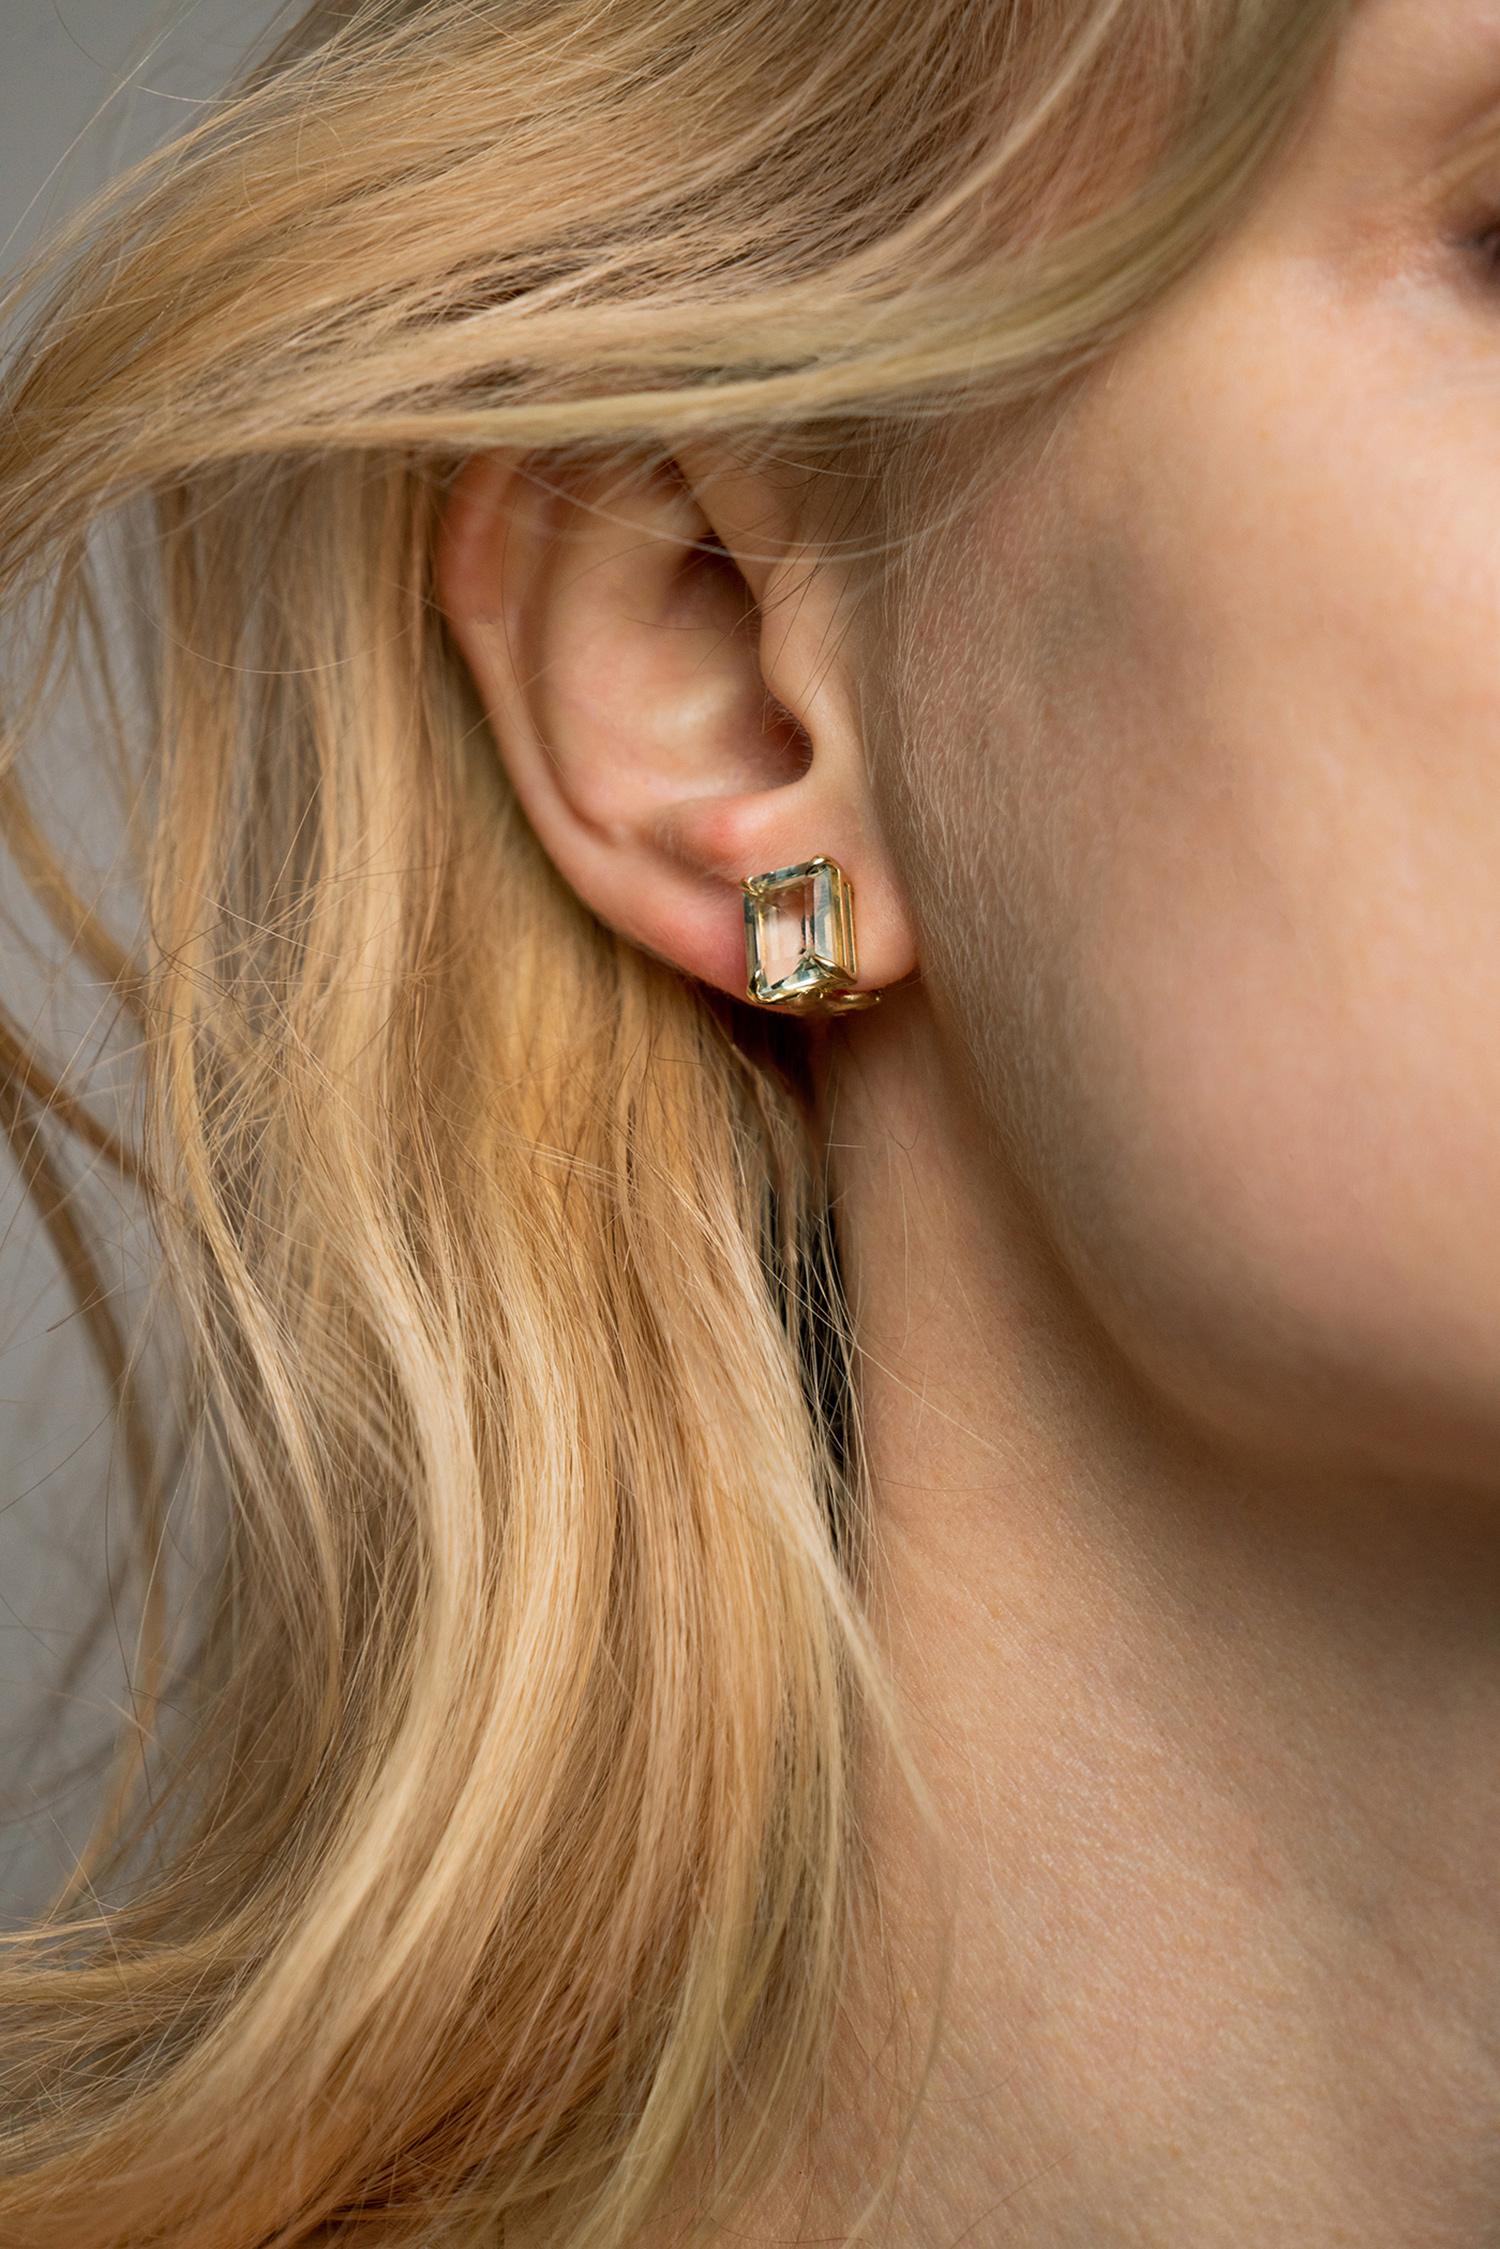 These contemporary stud earrings, named after Mesopotamia, feature natural minty light green quartzes and two different golden elements: elephant and daffodil. They belong to the collection, which was featured in a published issue of Vogue UA. The